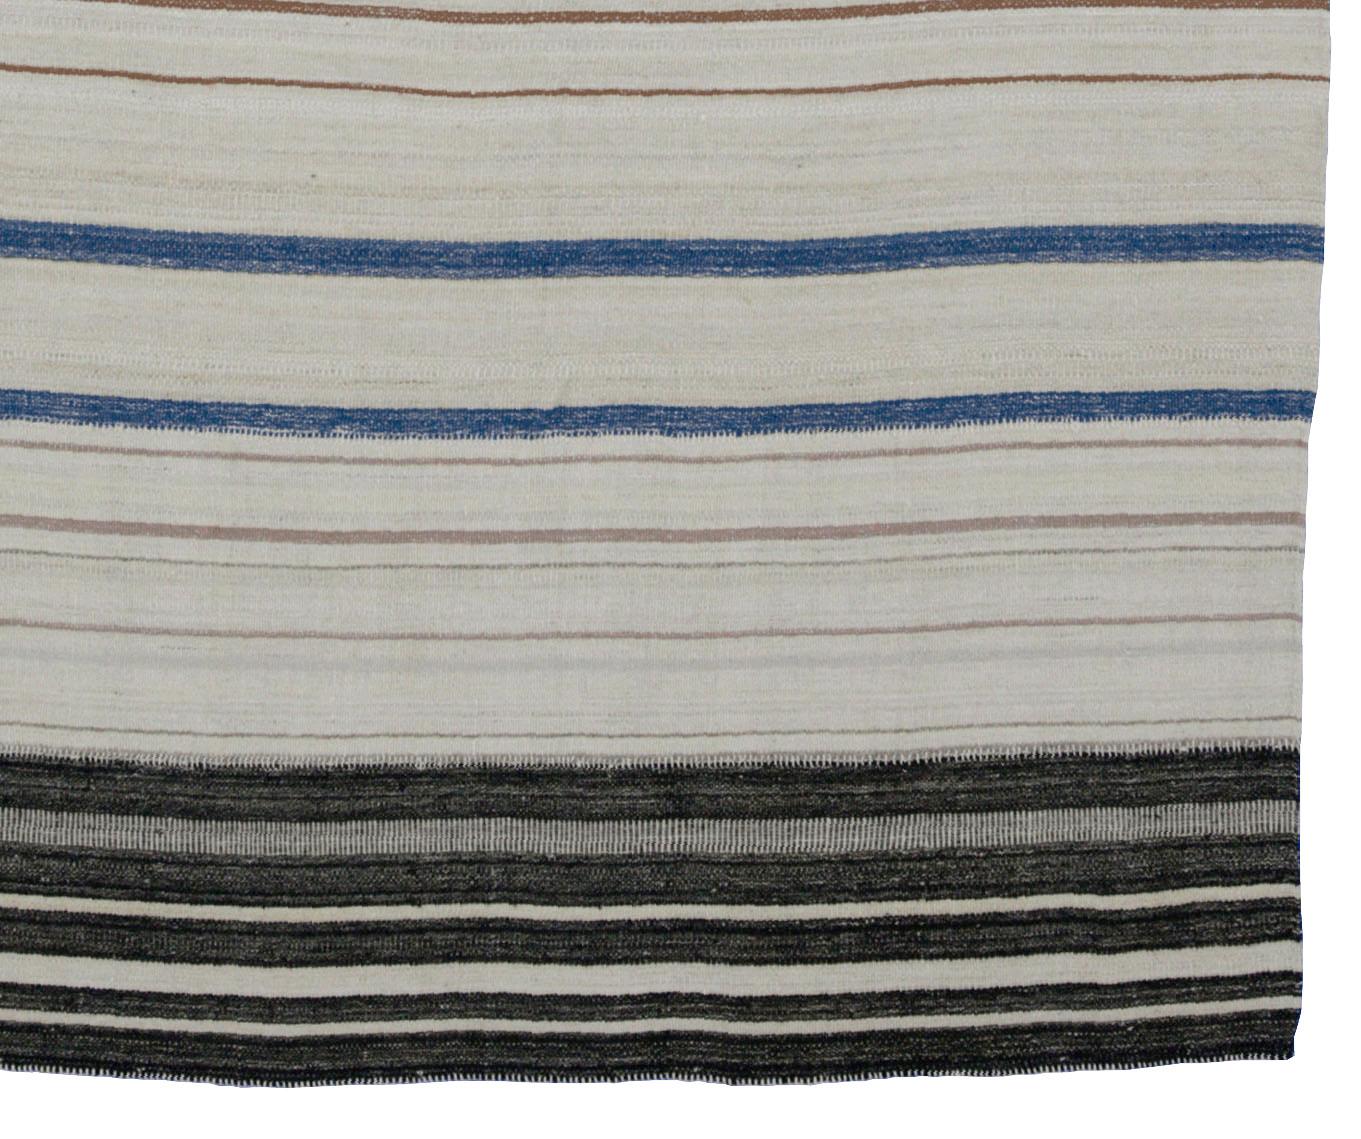 A new production Turkish rug handwoven from the finest sheep’s wool and colored with all-natural vegetable dyes that are safe for humans and pets. It’s a traditional Kilim flat-weave design featuring a lovely ivory field with brown, blue and black